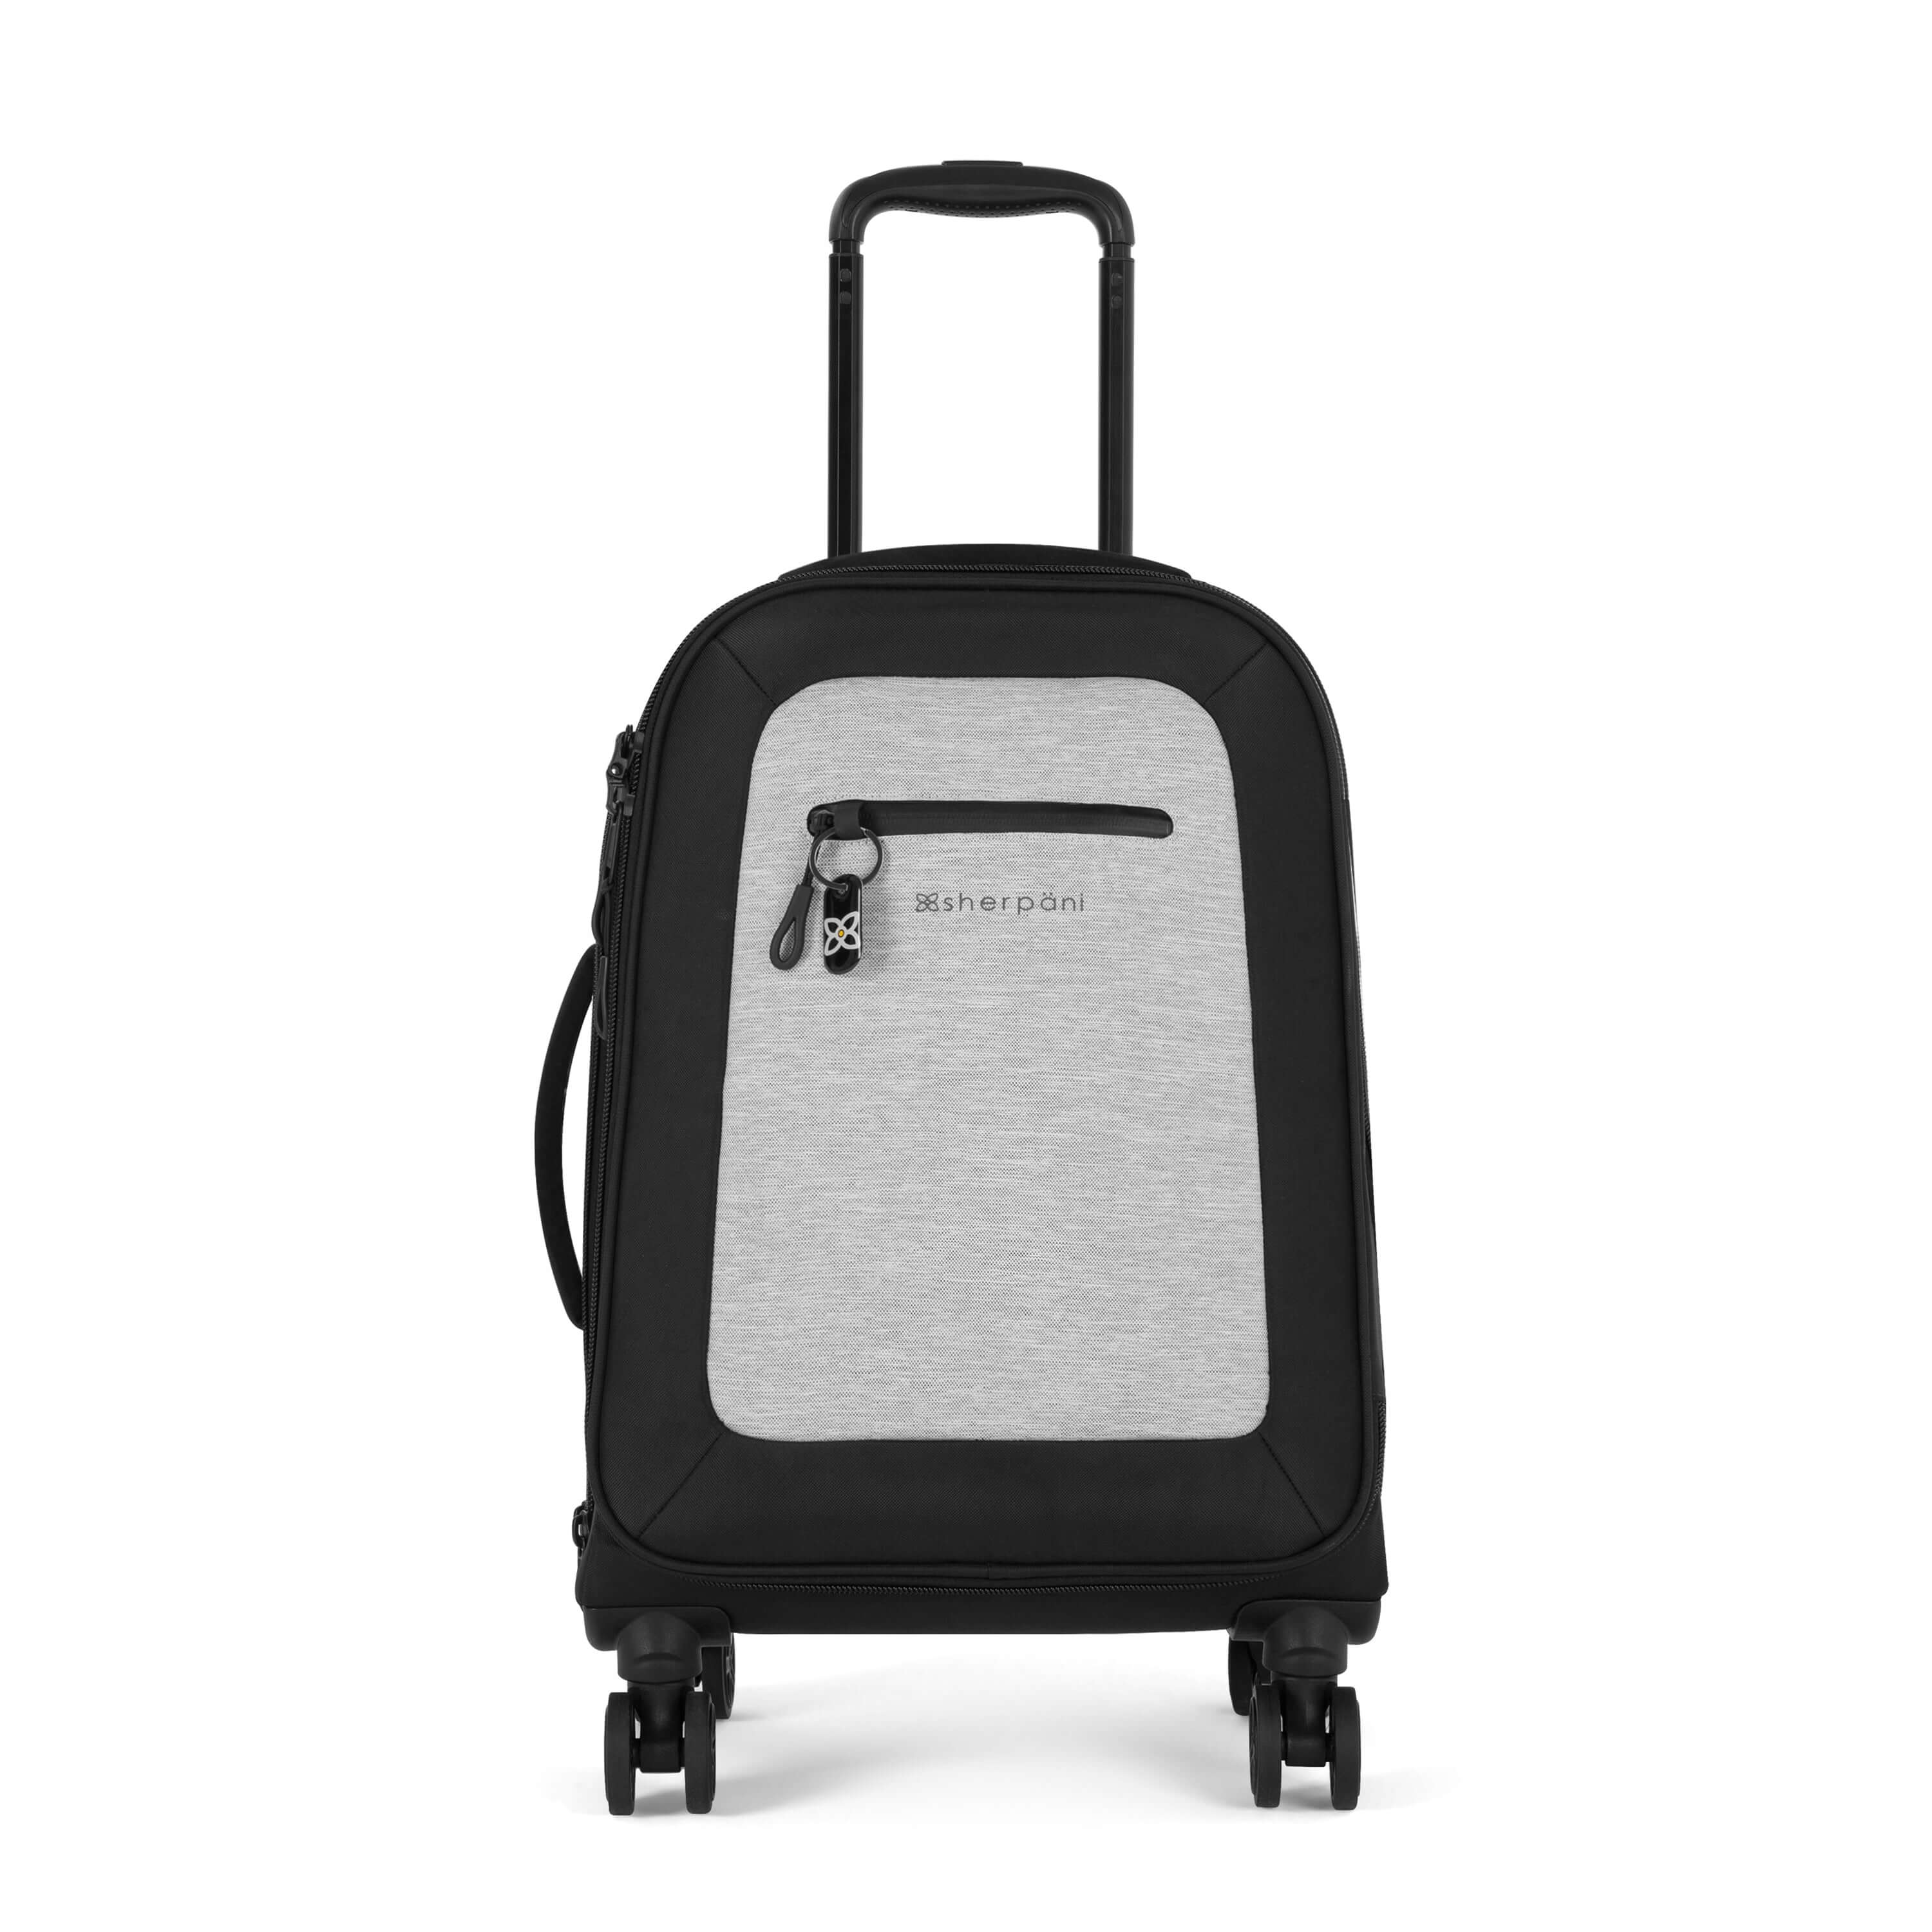 Flat front view of Sherpani's Anti-Theft luggage the Latitude in Sterling. The suitcase has a soft shell exterior made from recycled plastic bottles and features vegan leather accents in black. 